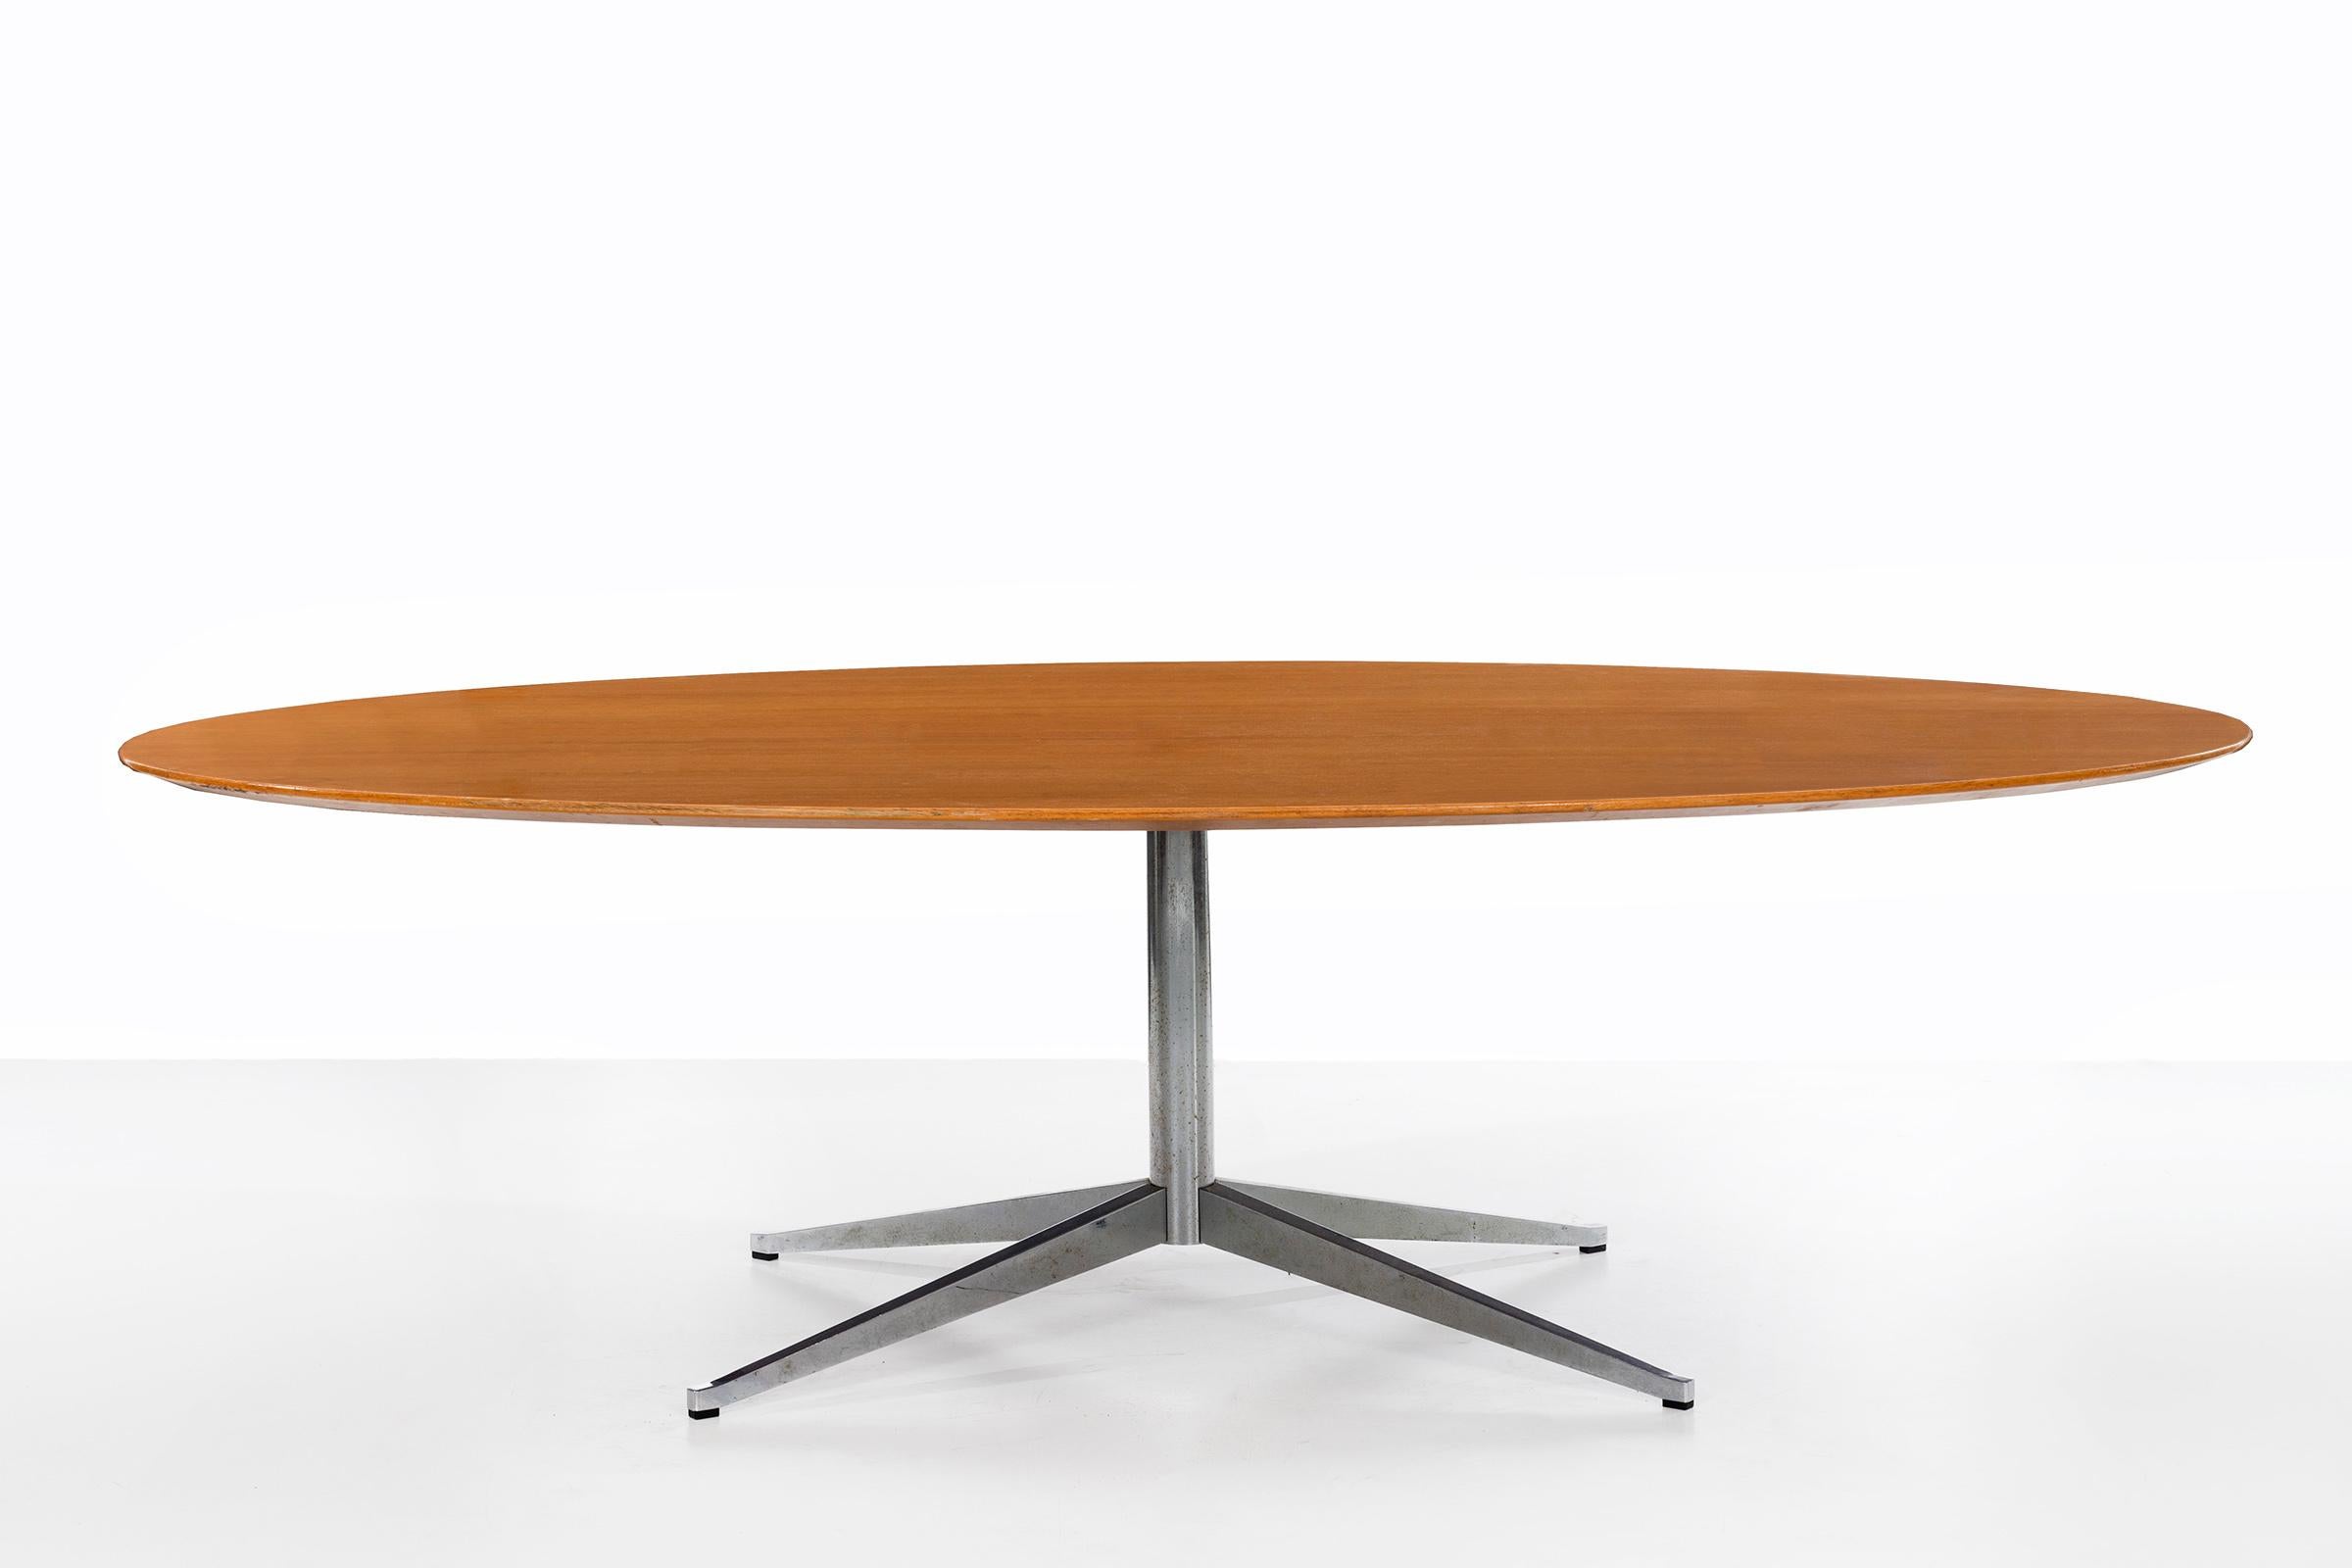 Florence Knoll for Knoll International oval dining table or executive desk.
Attractive oakwood-grained top with bevelled edge, X base, solid plated steel legs, plastic glides.
 
Label Knoll International.

 